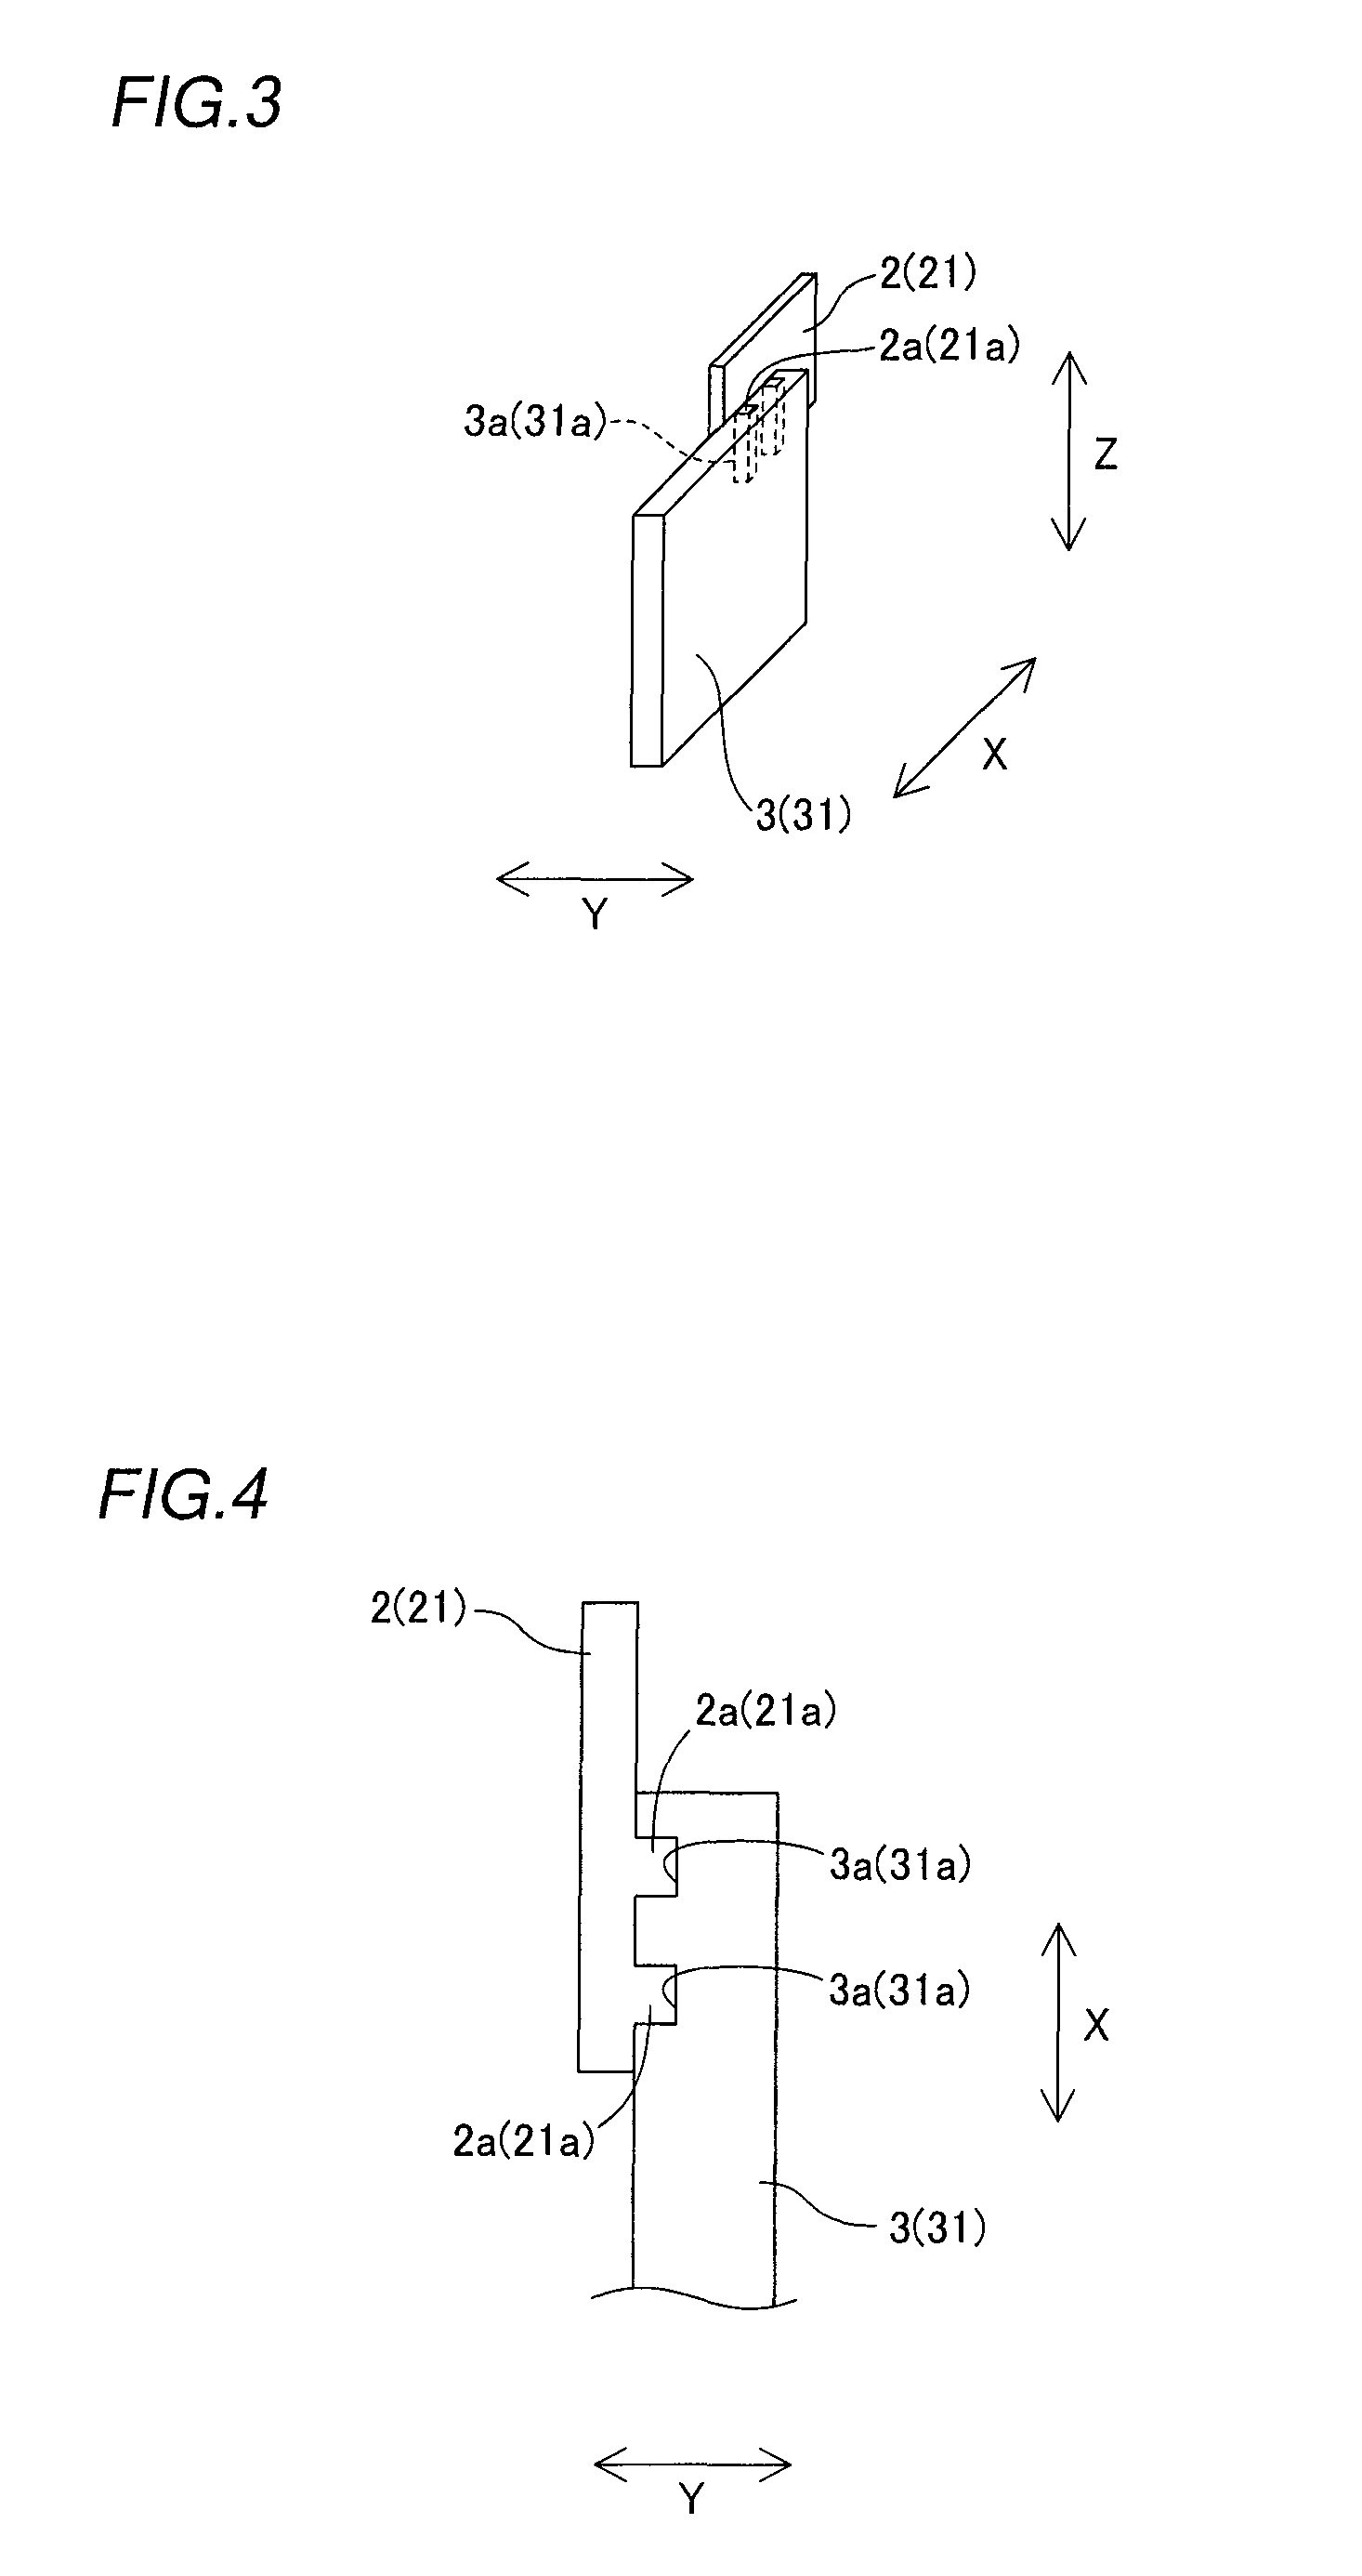 Mobile Device and Radio Communication Portion of Mobile Device